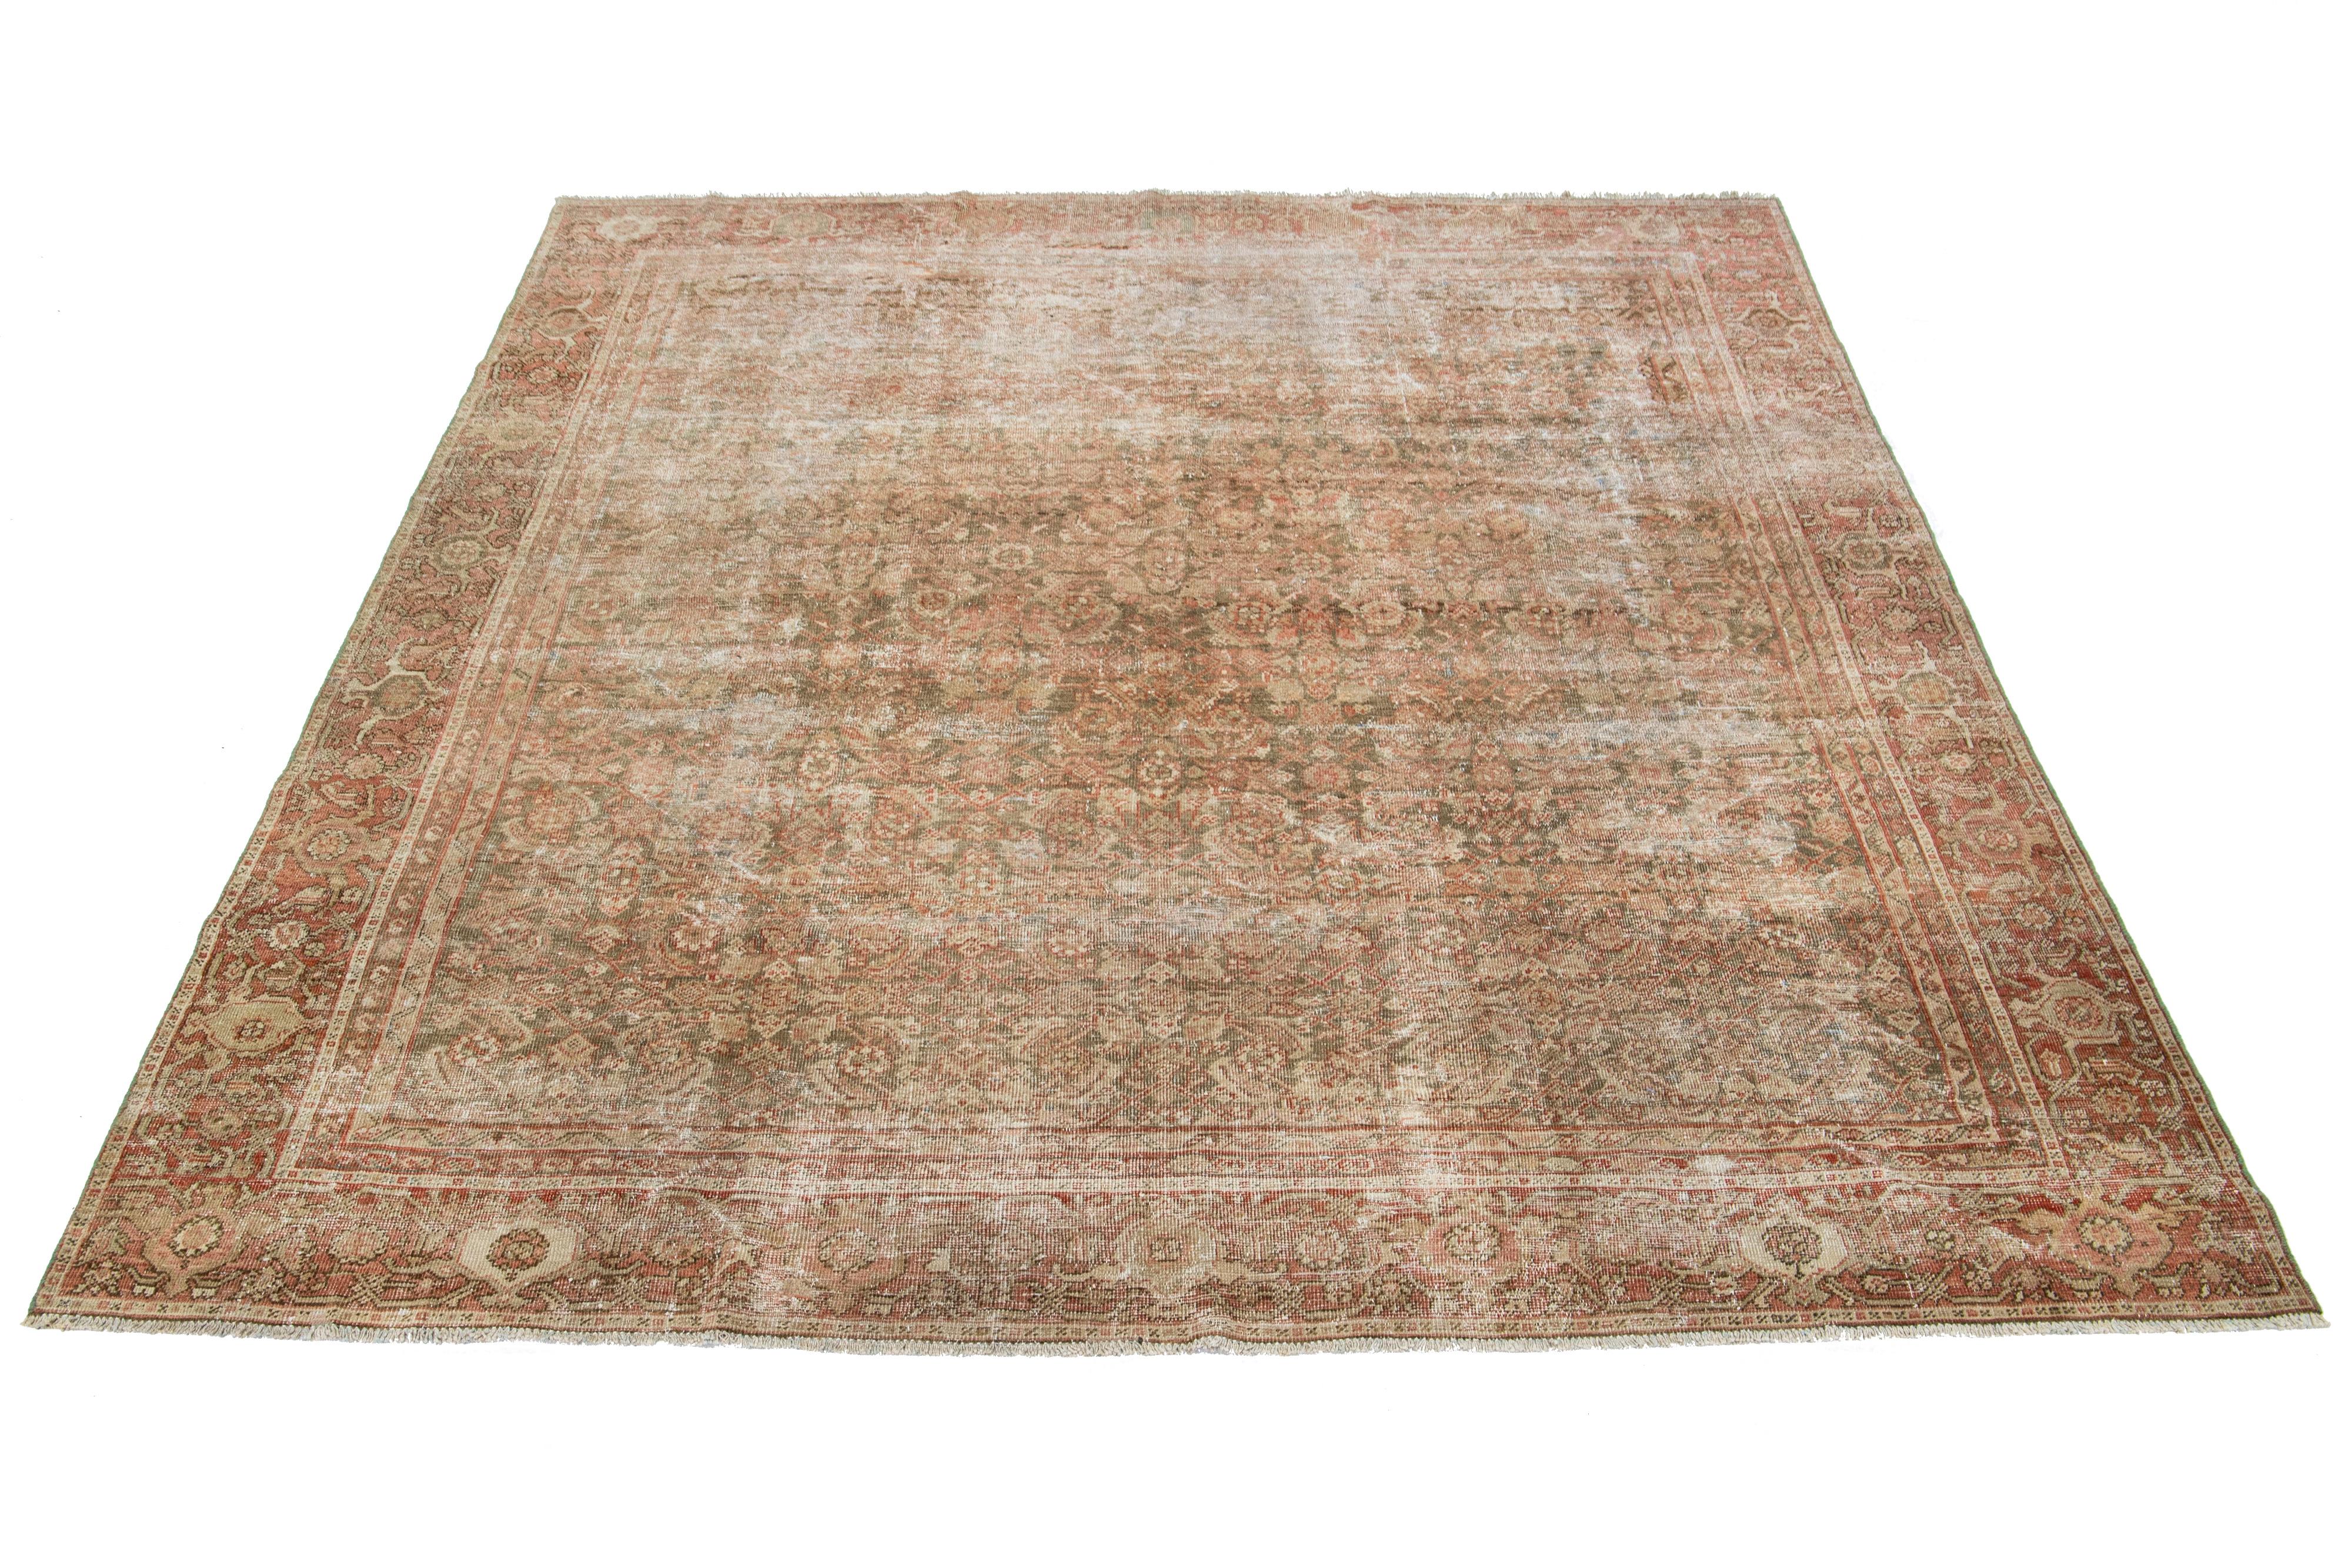 Handcrafted, this Persian Tabriz wool rug beautifully displays a traditional floral pattern. The stunning contrast between the brown backdrop and the intricate rust floral design adds to its allure.

This rug measures 8' x 9'5'.

Our Rugs are